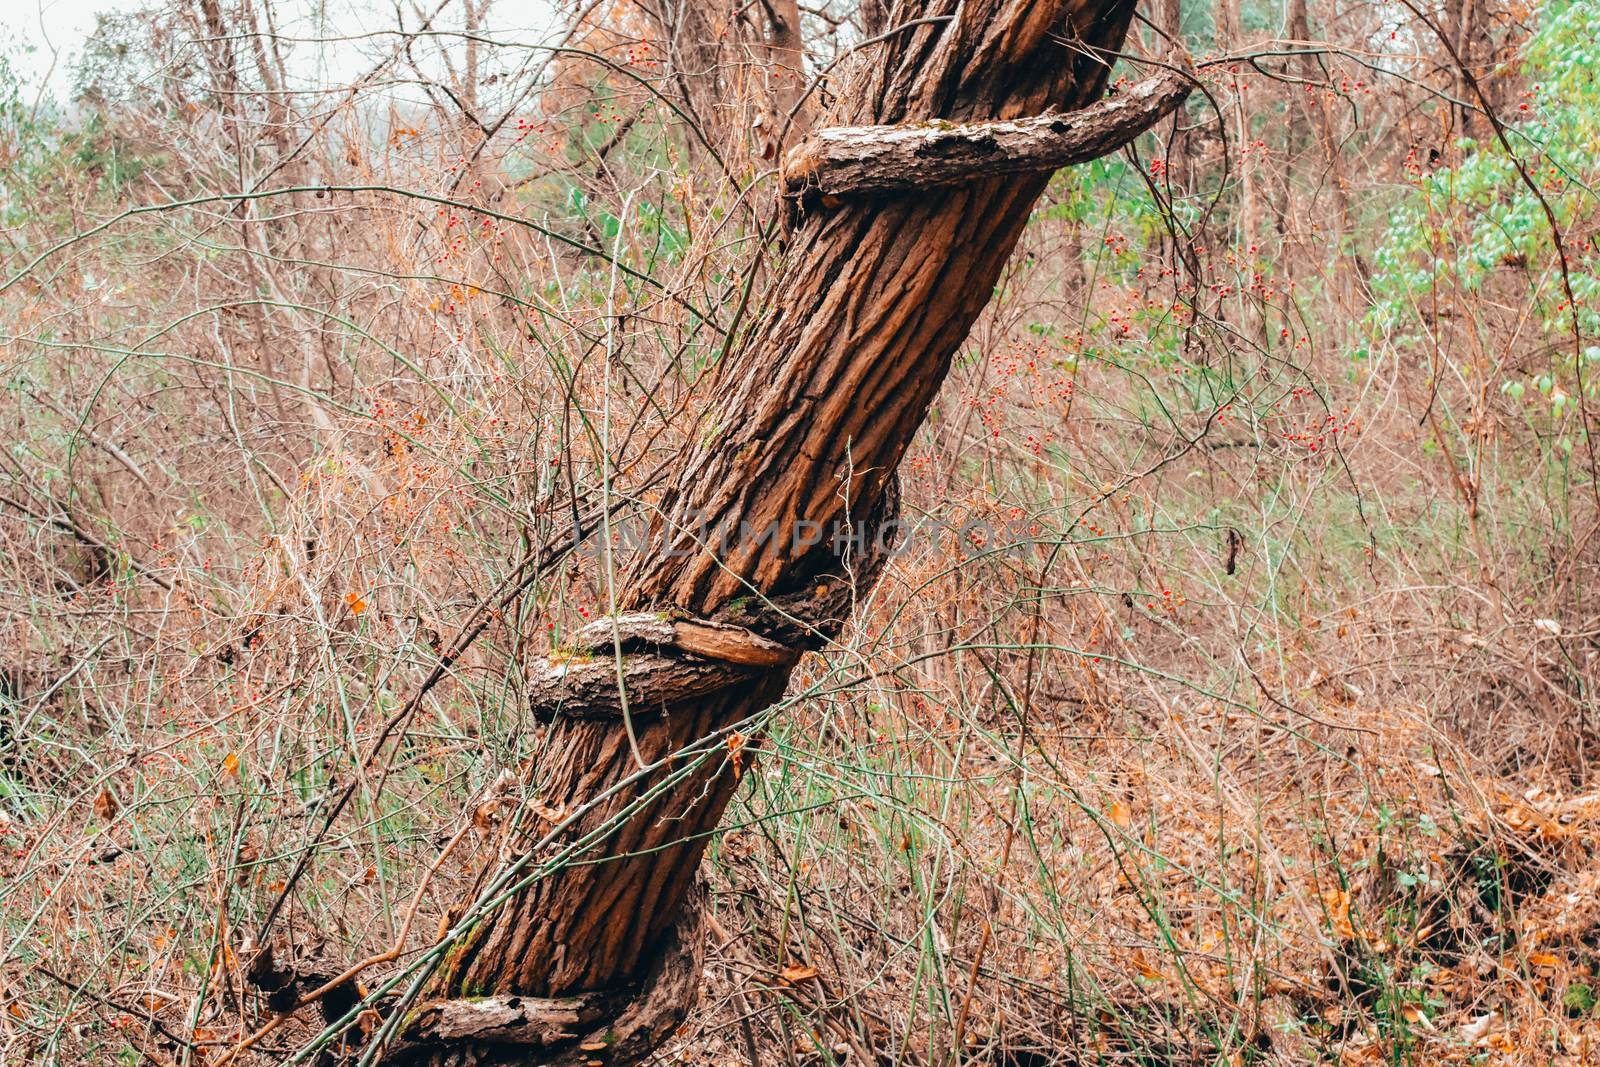 A Tree With a Dead Vine Wrapped Tightly Around It by bju12290